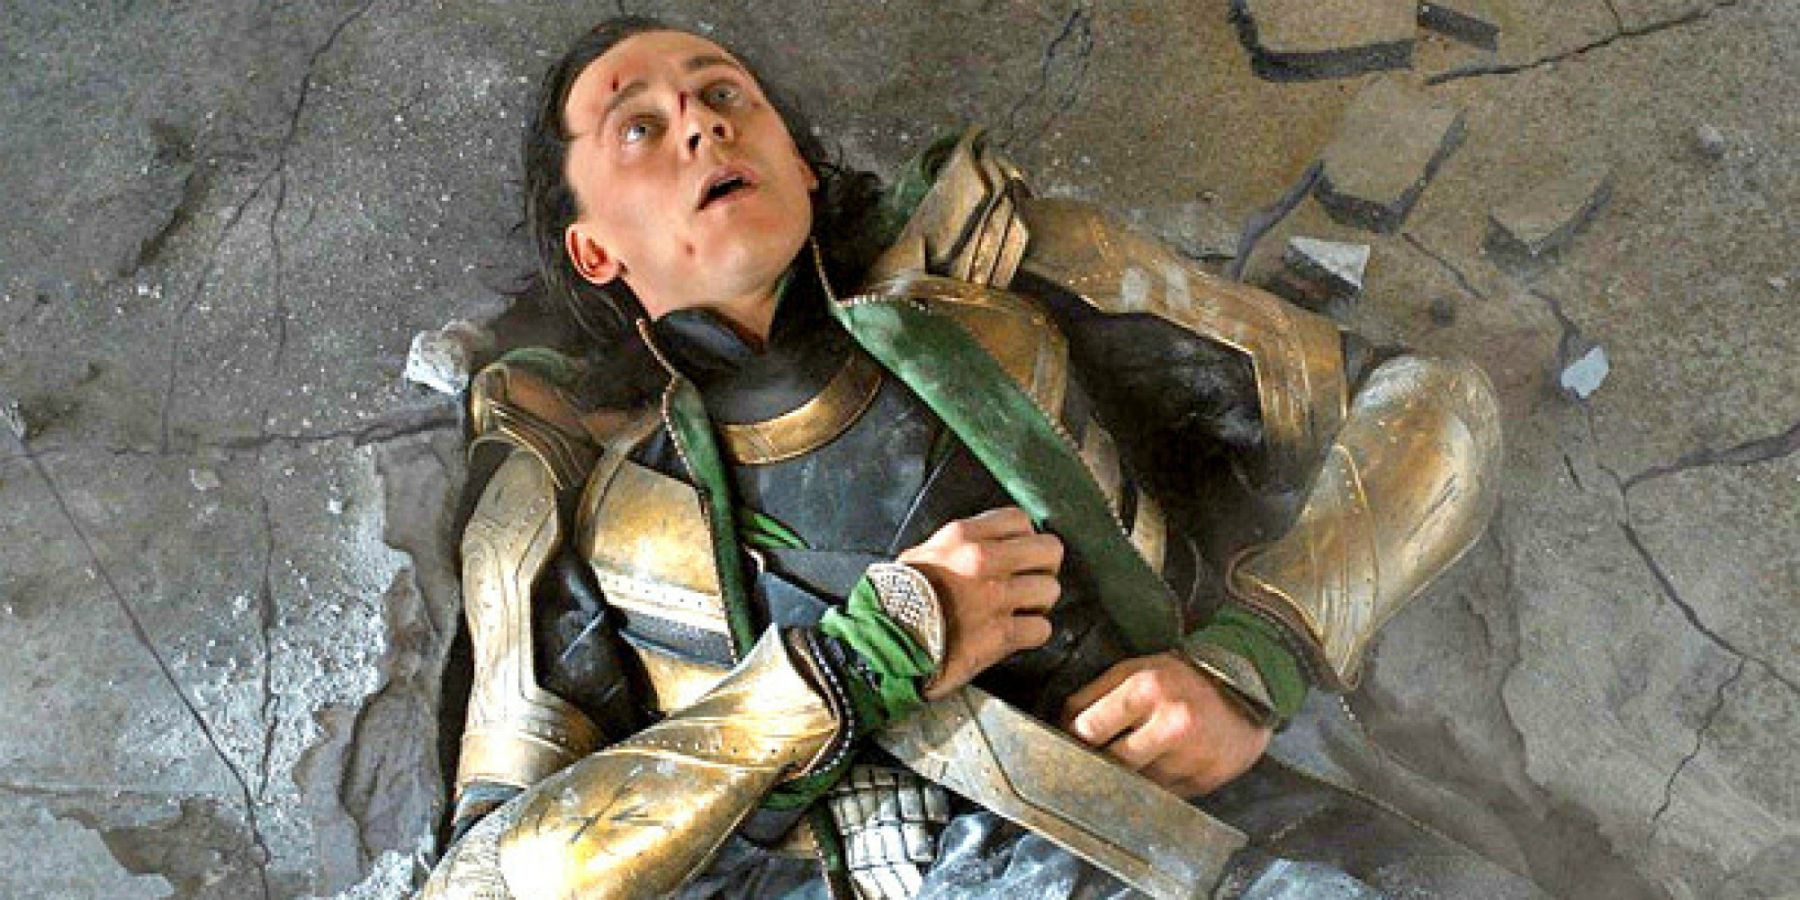 Loki after getting beaten up by the Hulk